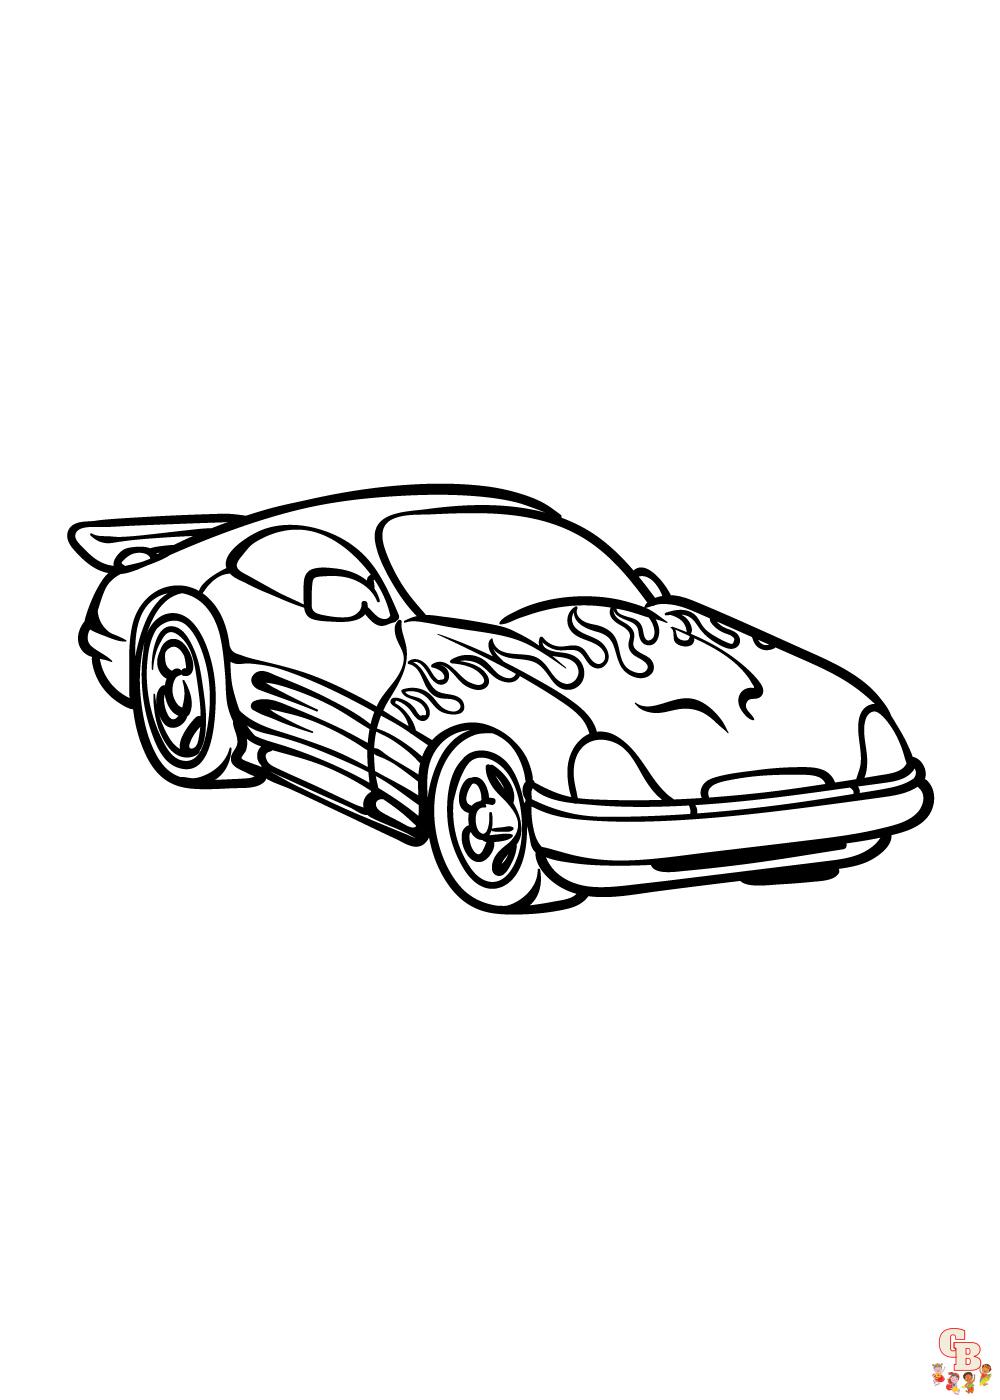 Race Car Coloring Pages FREE Printable 27